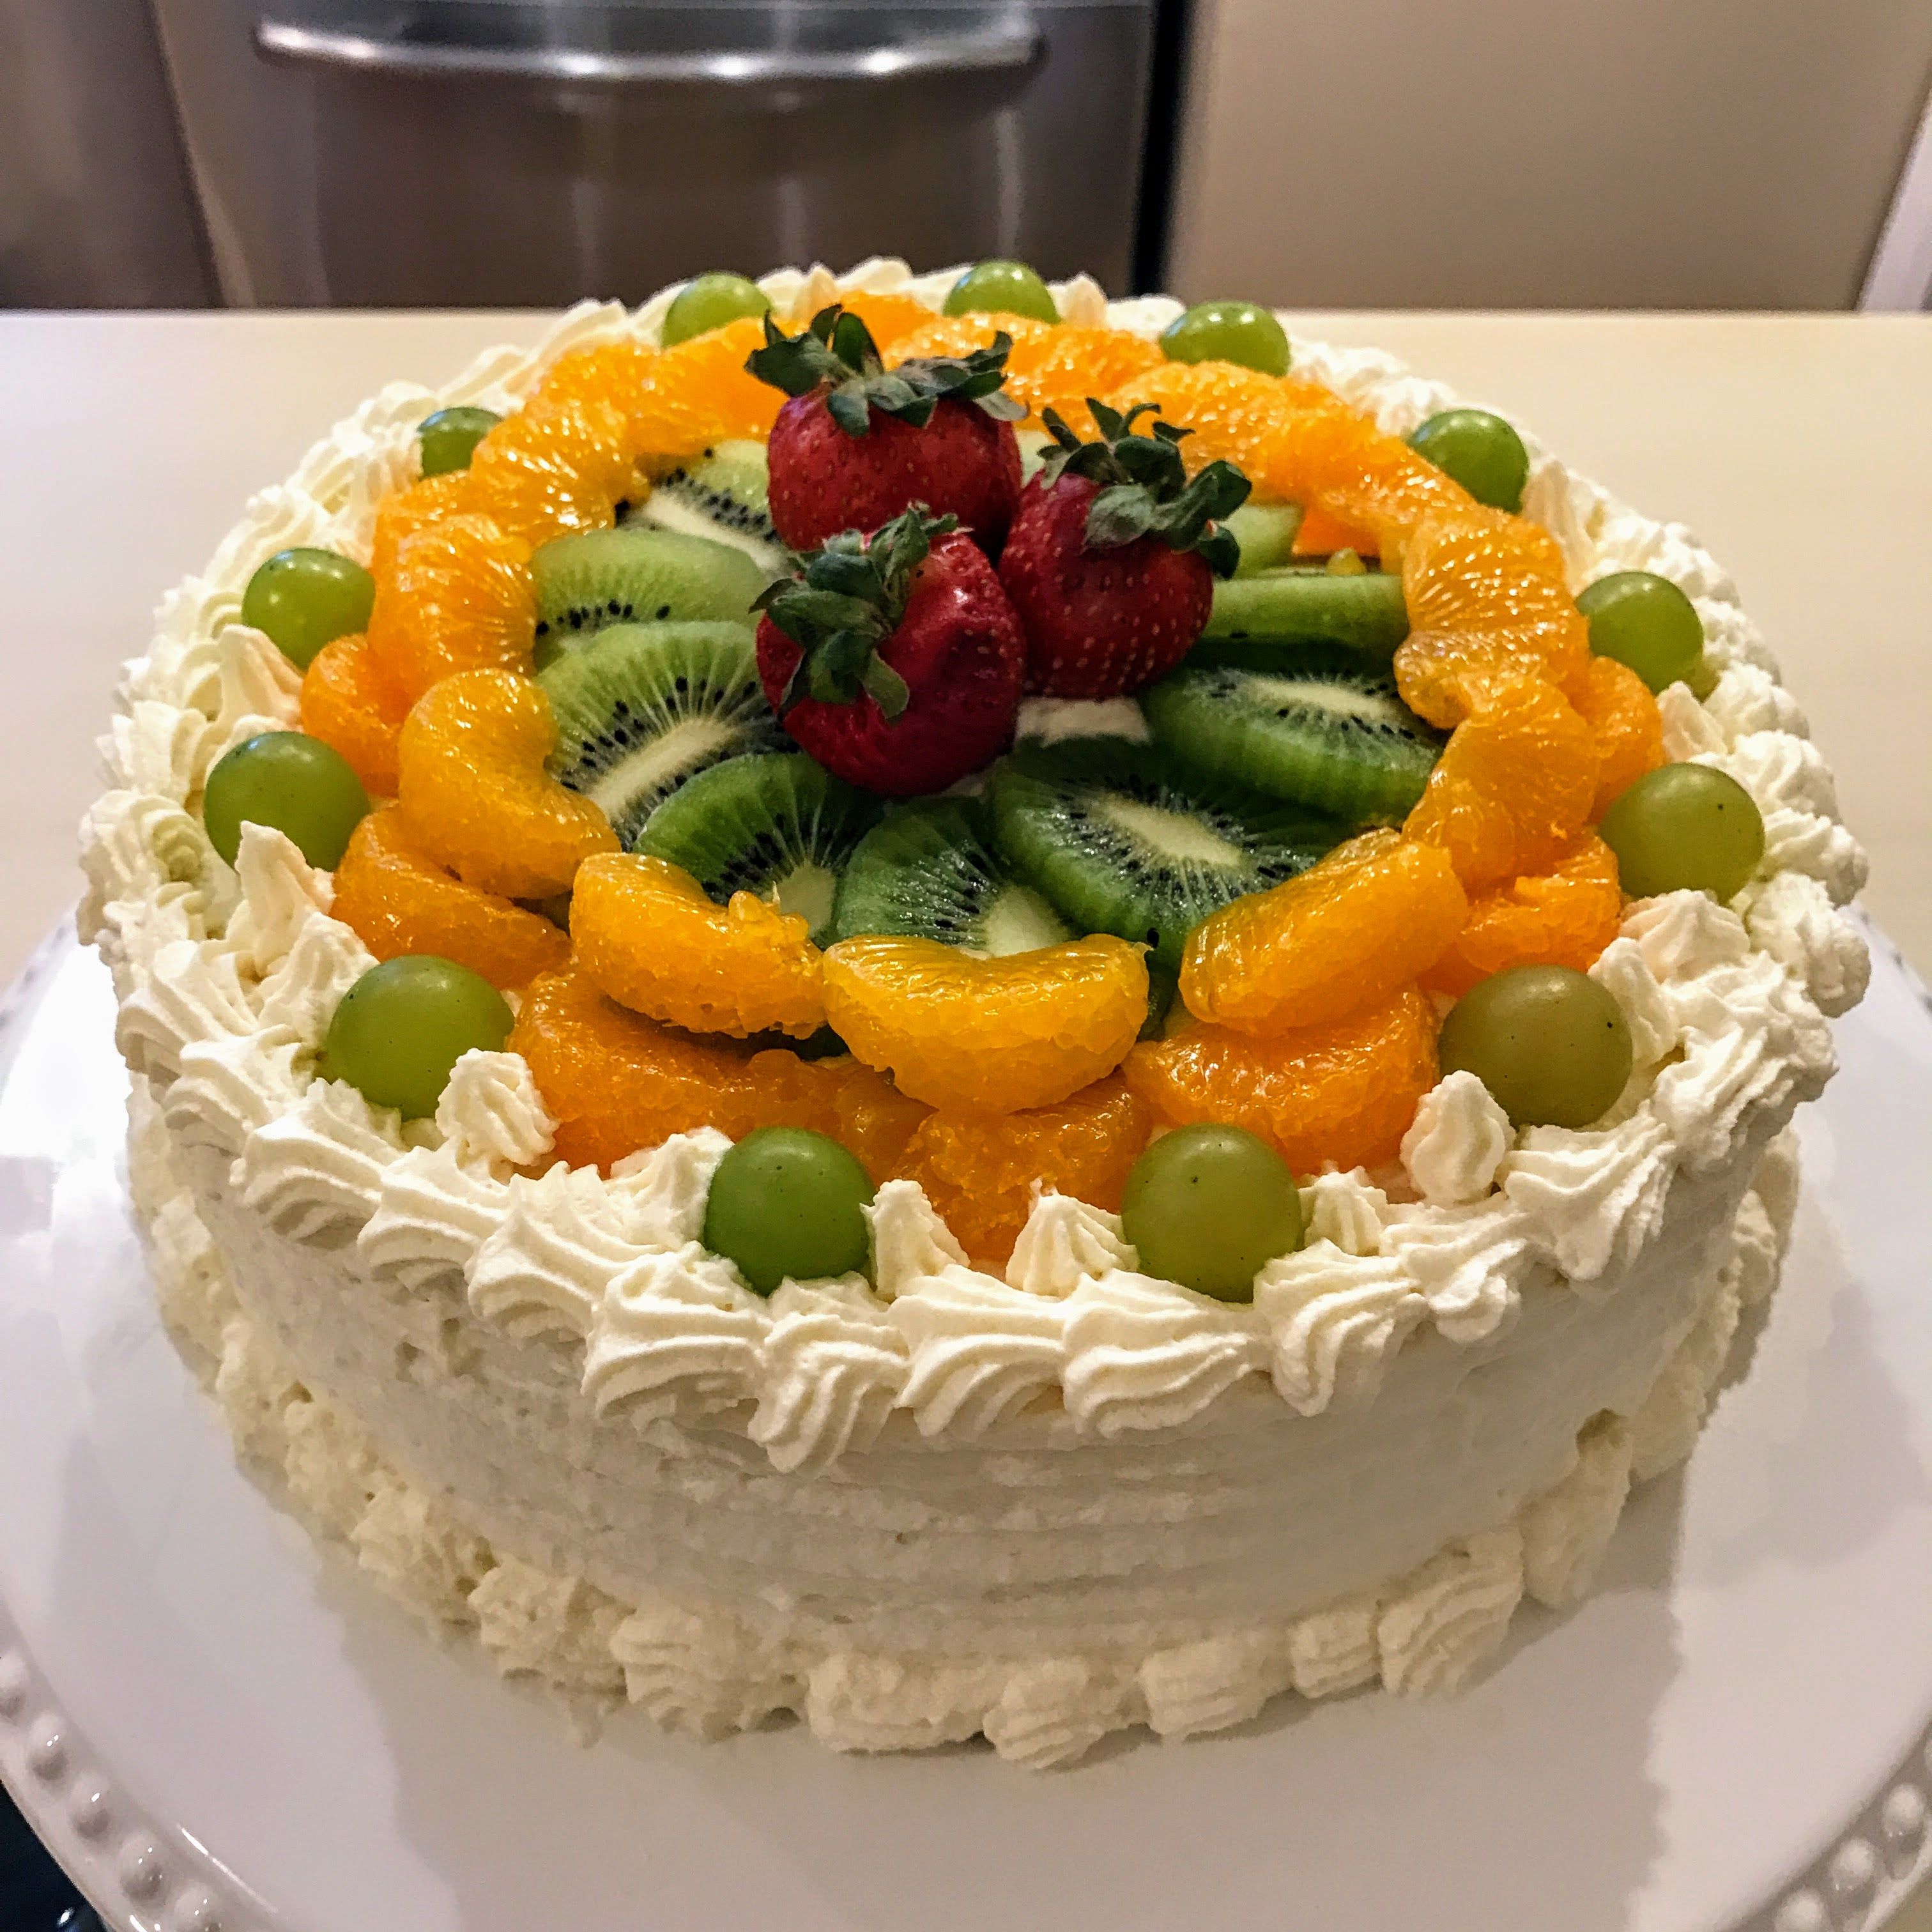 Baked a Hong Kong Bakery Style Fresh Fruit Cake for Dad's birthday ...